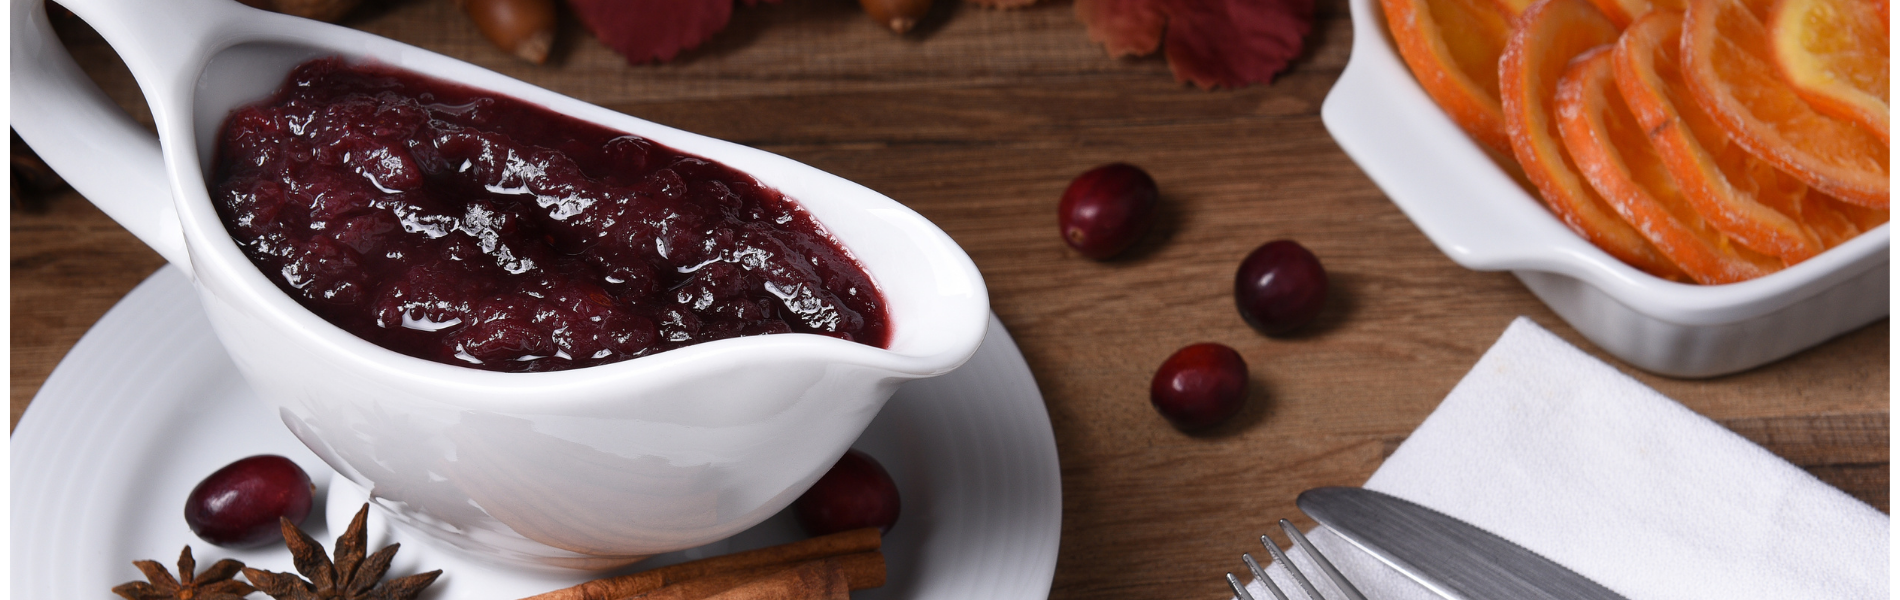 A serving dish of deep red cranberry jam.